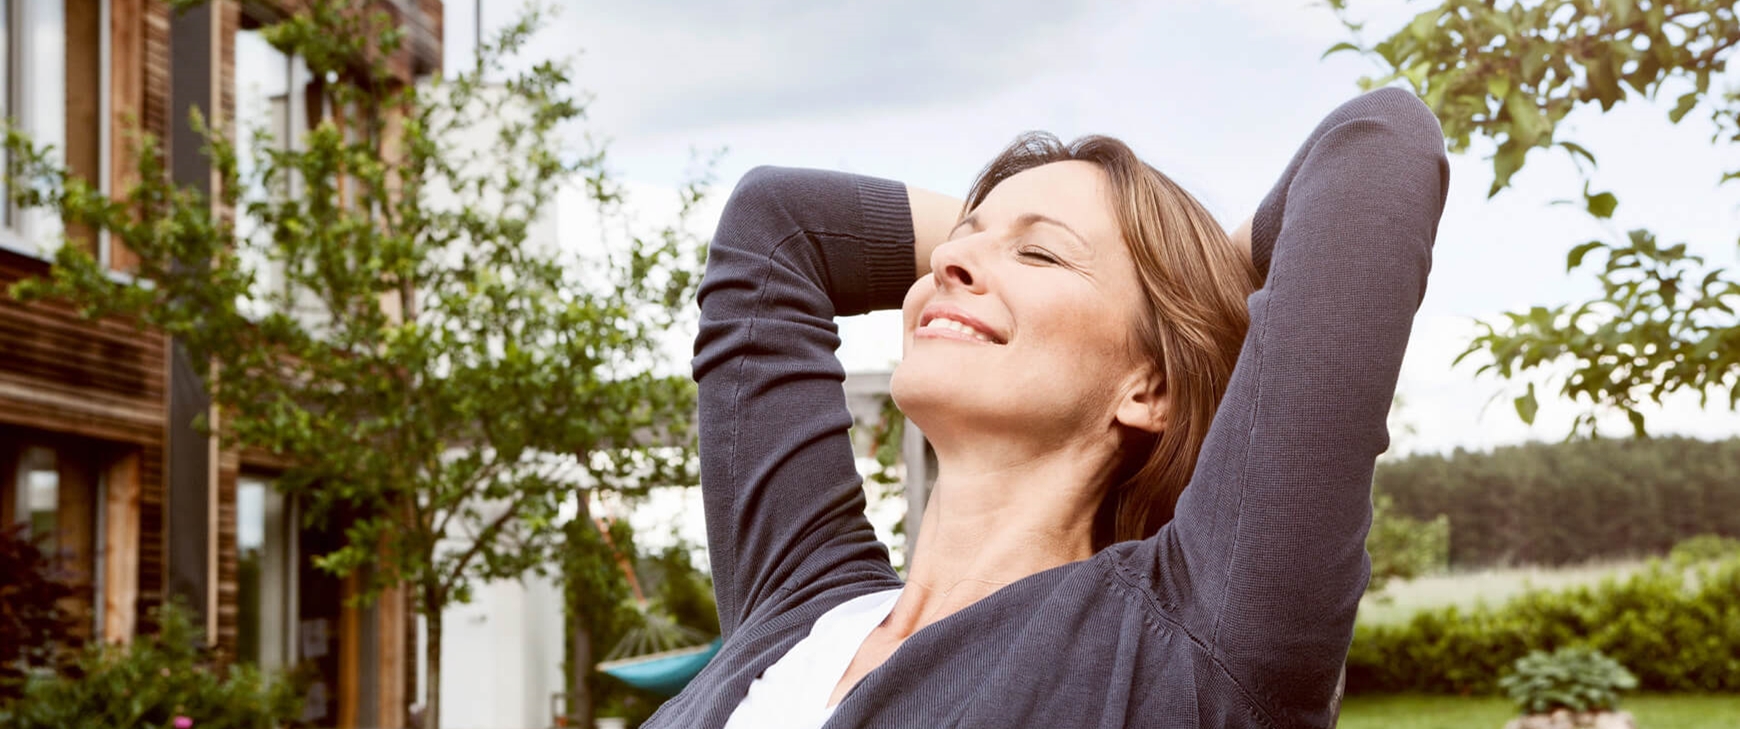 Menopause and problems during menopause